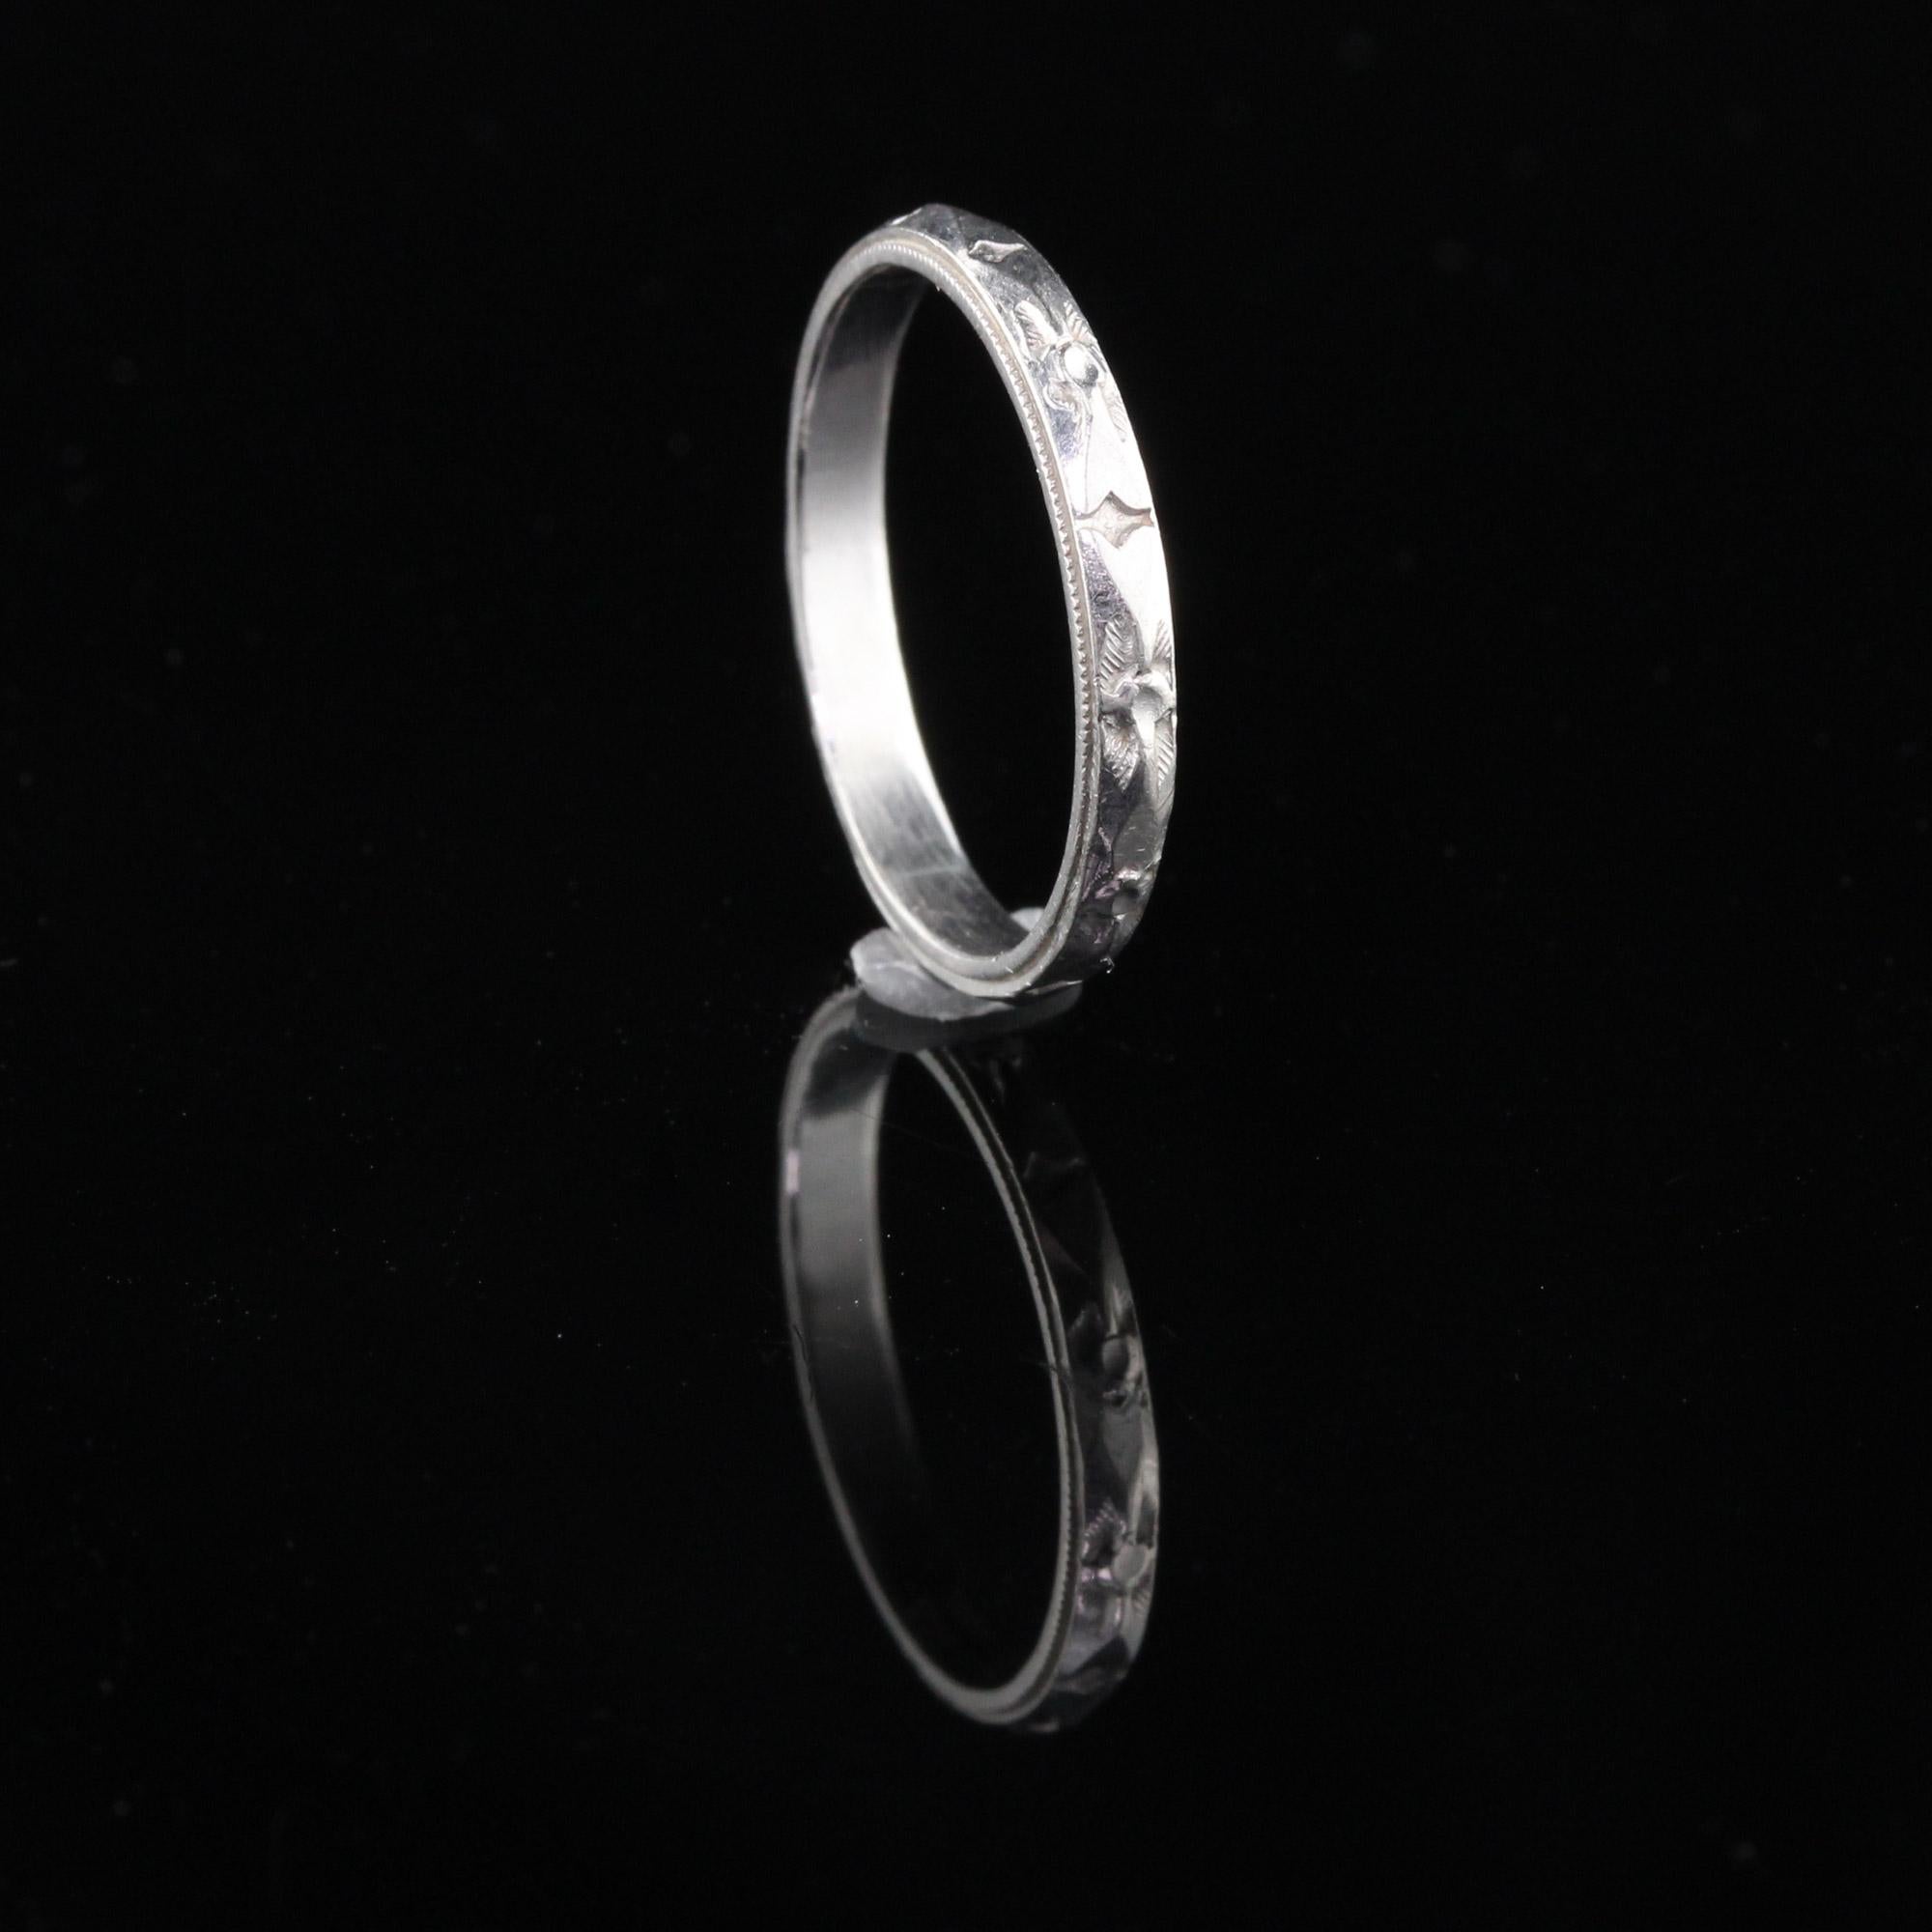 Art Deco Platinum Engraved Wedding Band In Excellent Condition For Sale In Great Neck, NY